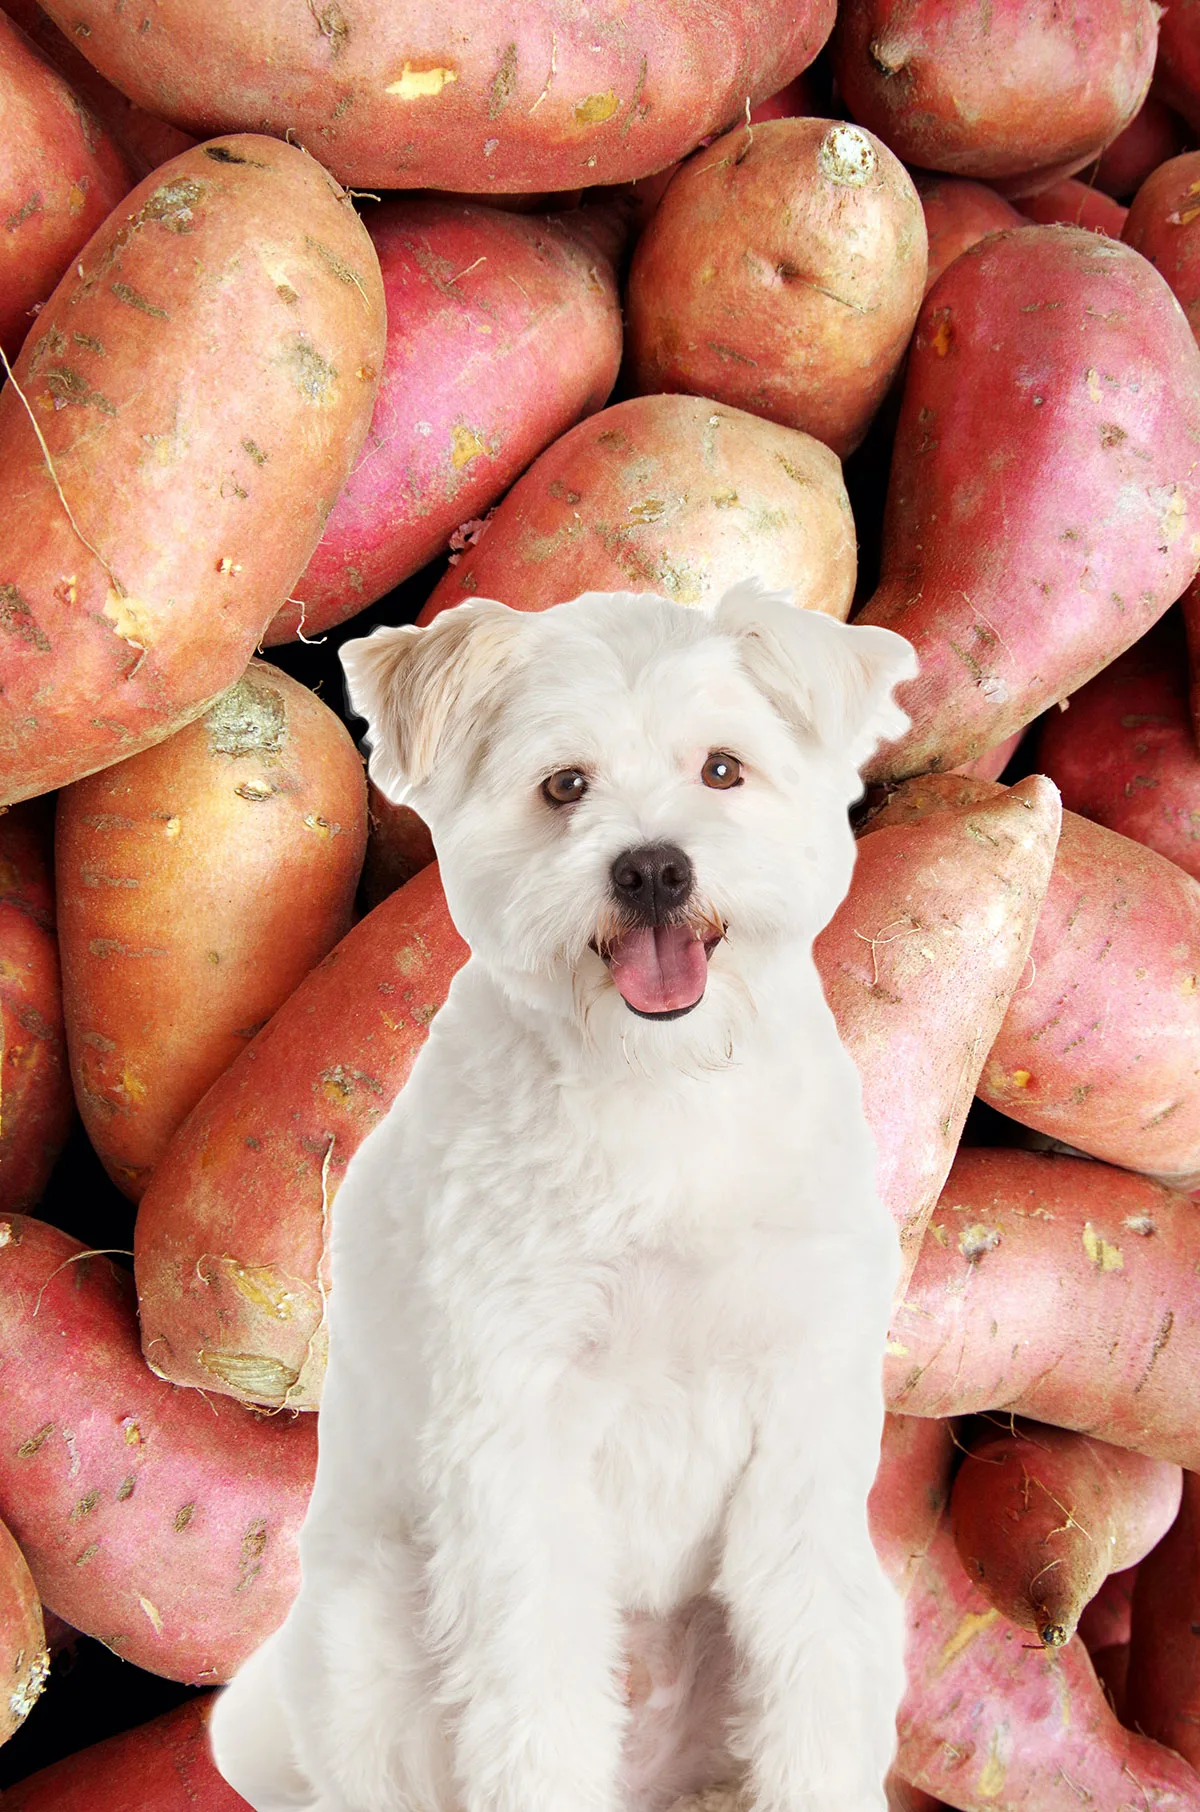 A white dog with a bunch of sweet potatoes